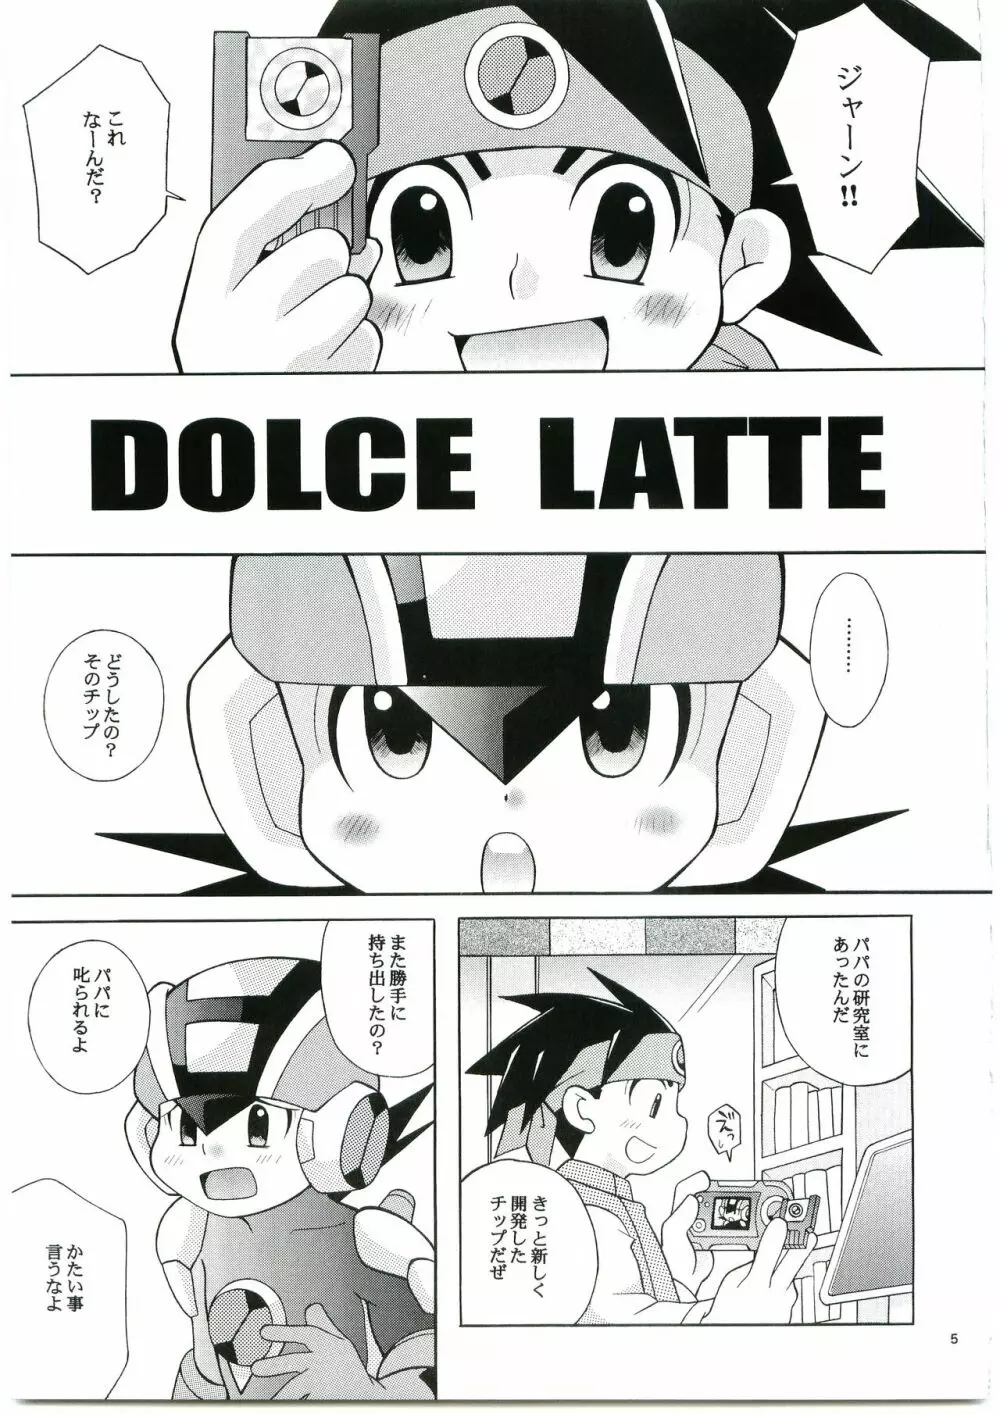 DOLCE LATTE Page.4